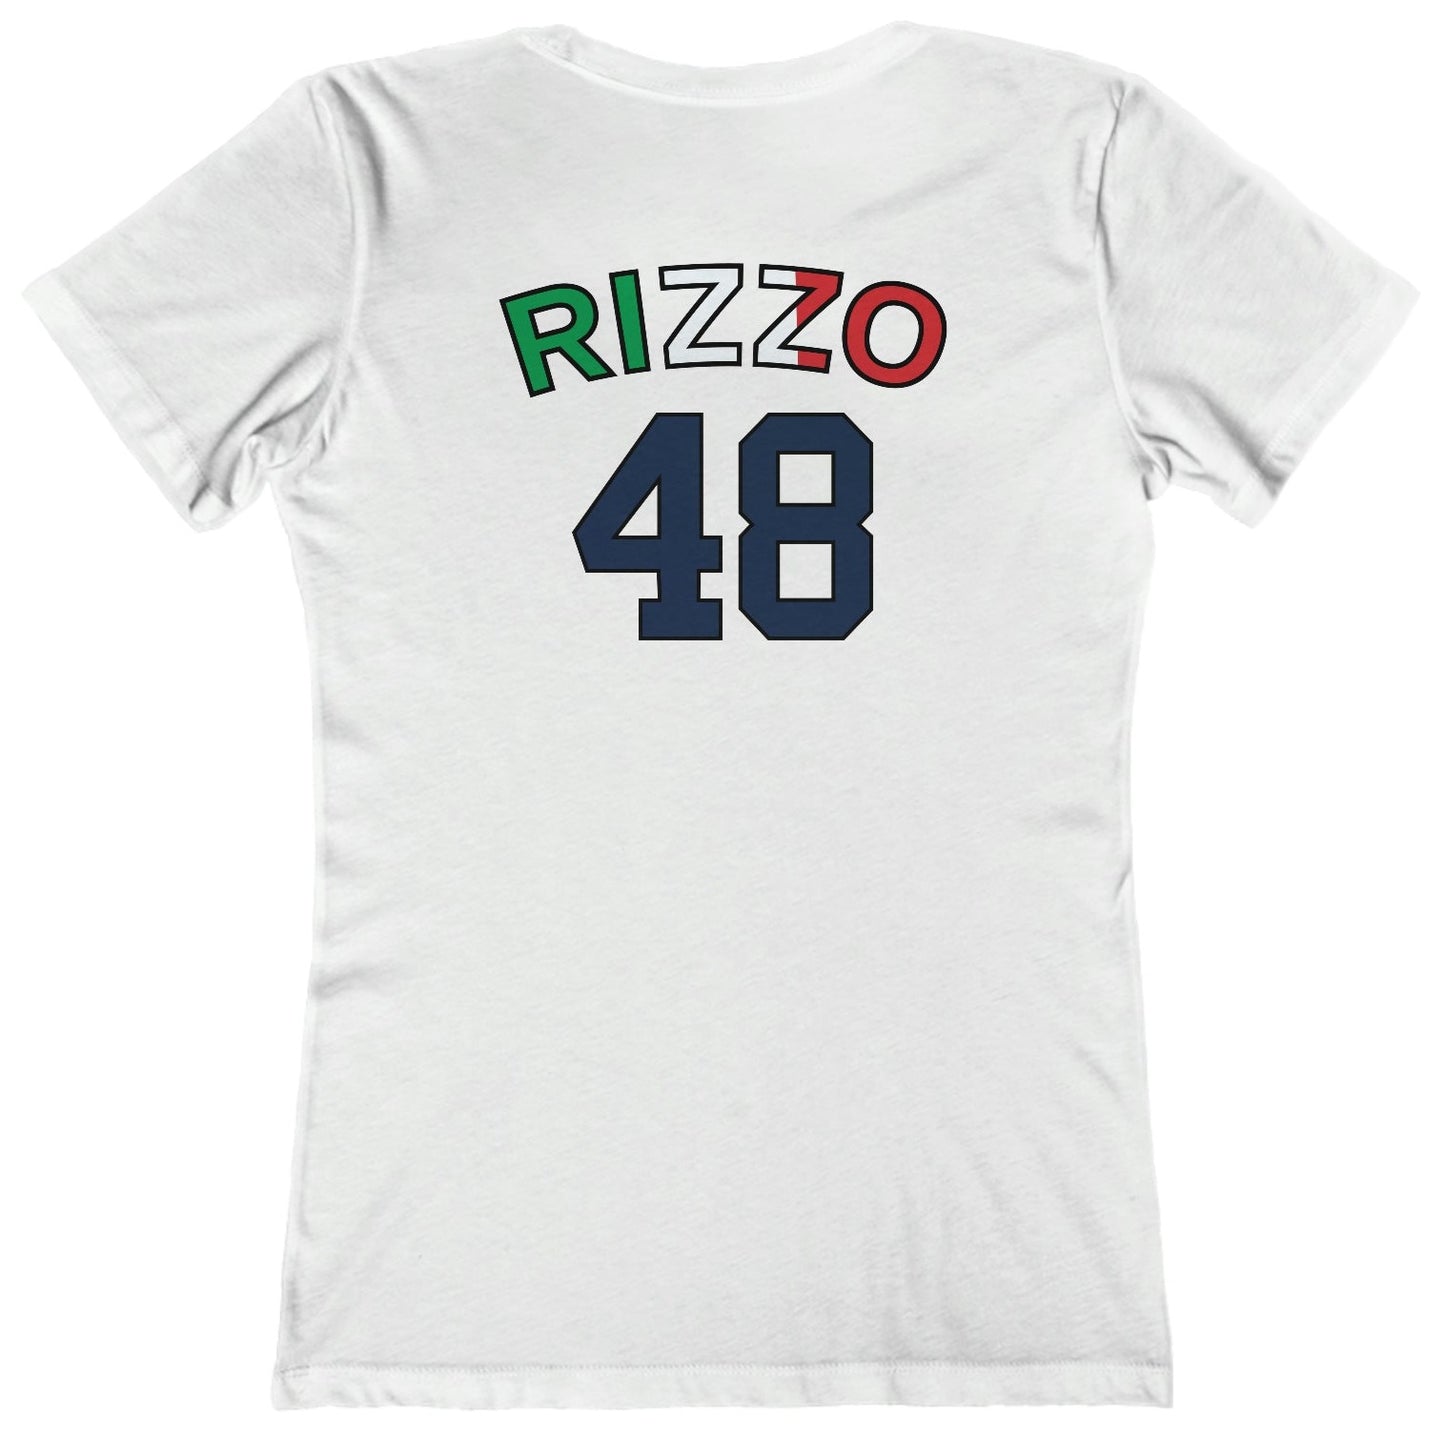 Anthony Rizzo - Women's T-Shirt (front and back)